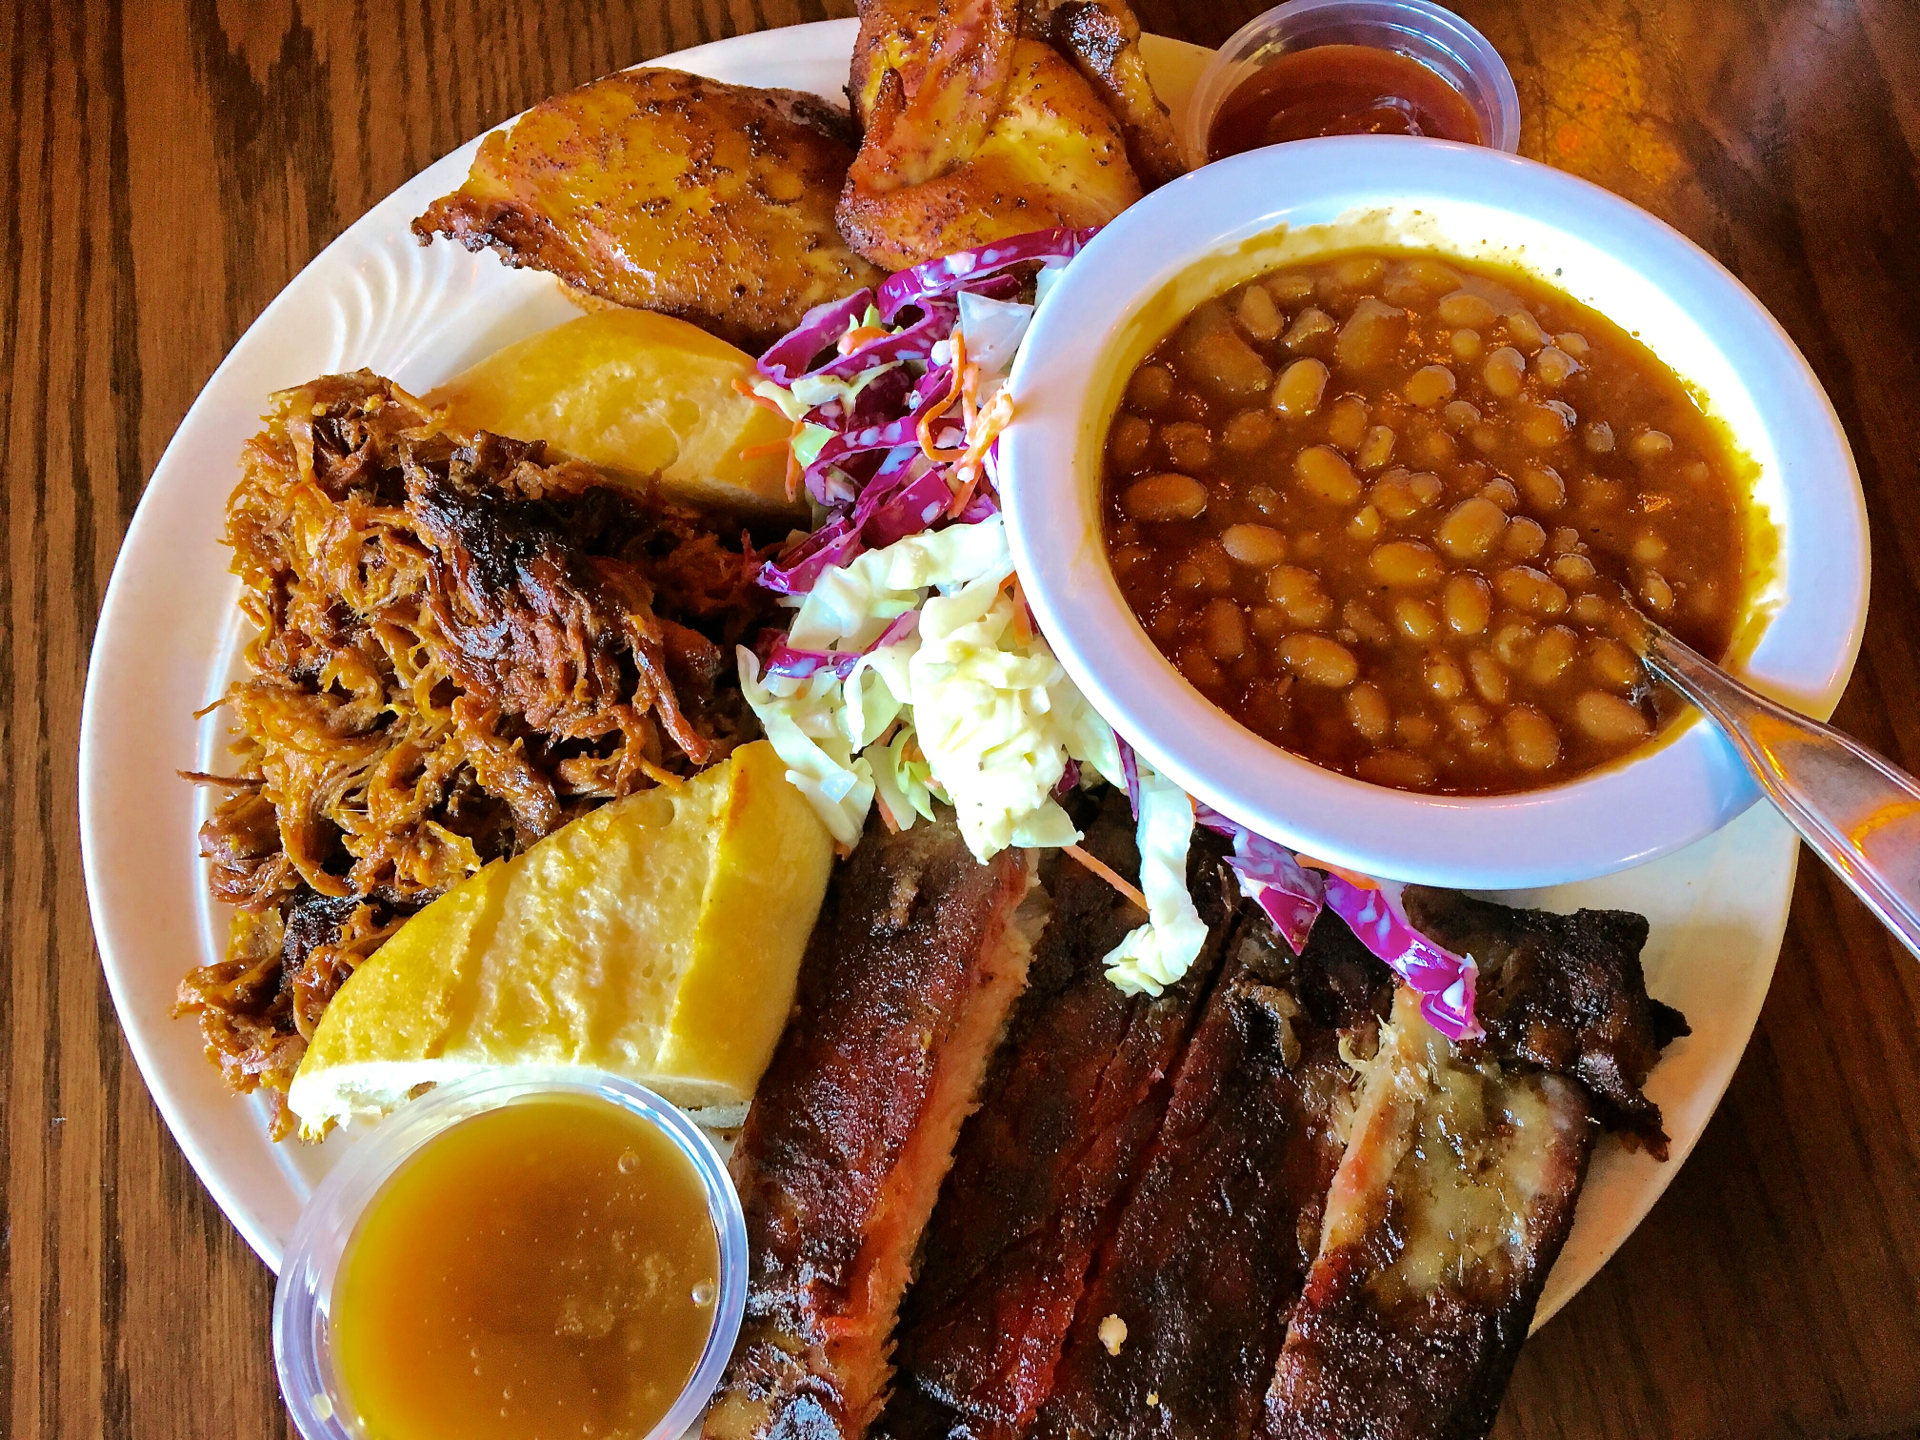 A combination plate with ribs, roasted chicken and pulled pork at The Cats.